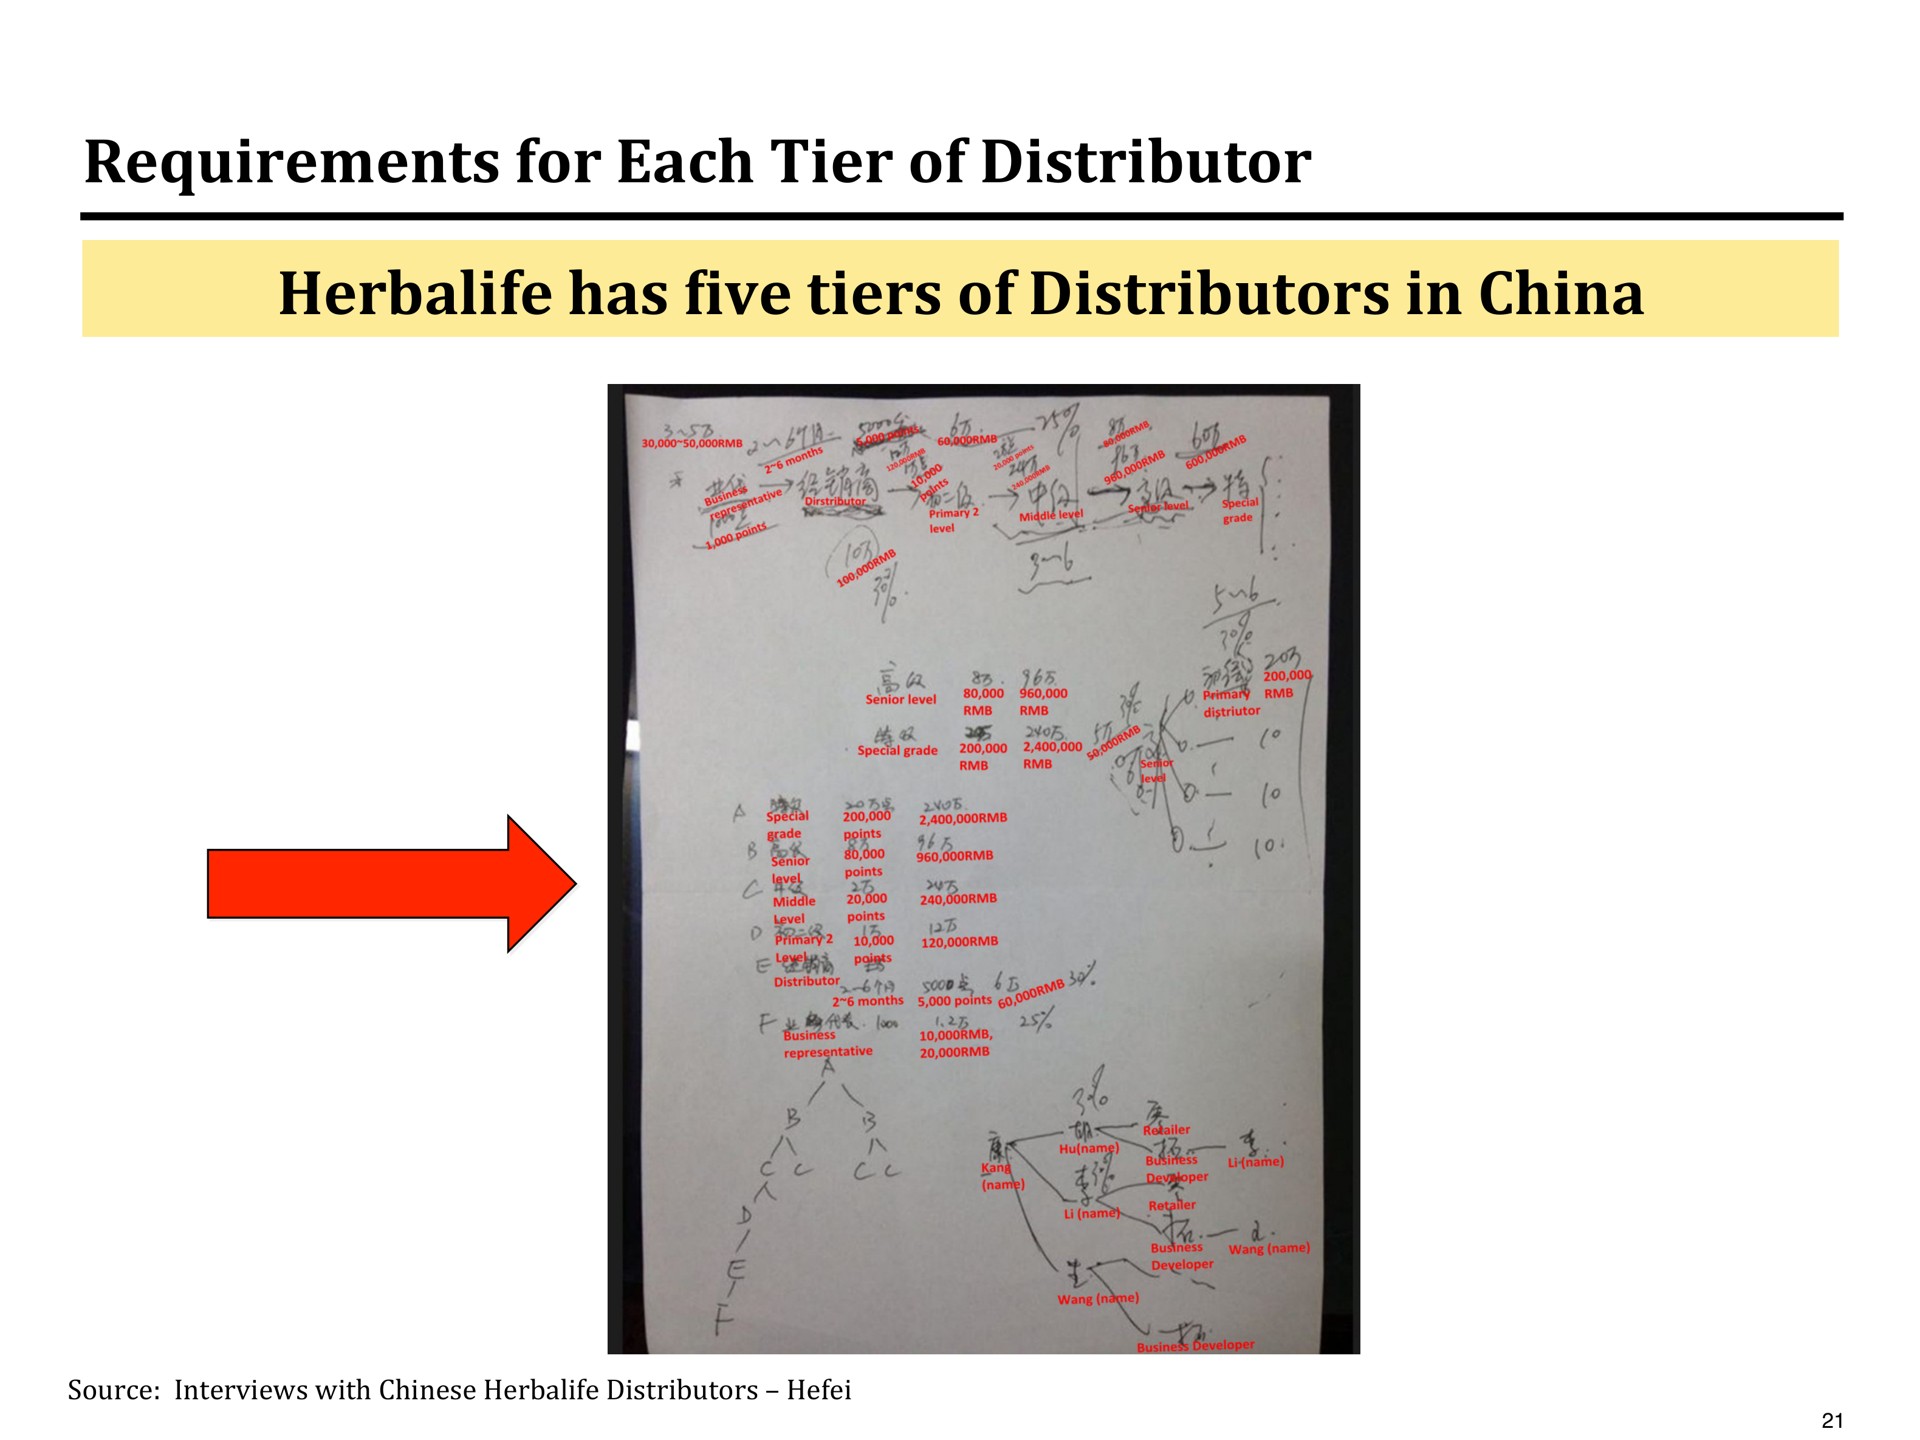 requirements for each tier of distributor has five tiers of distributors in china | Pershing Square